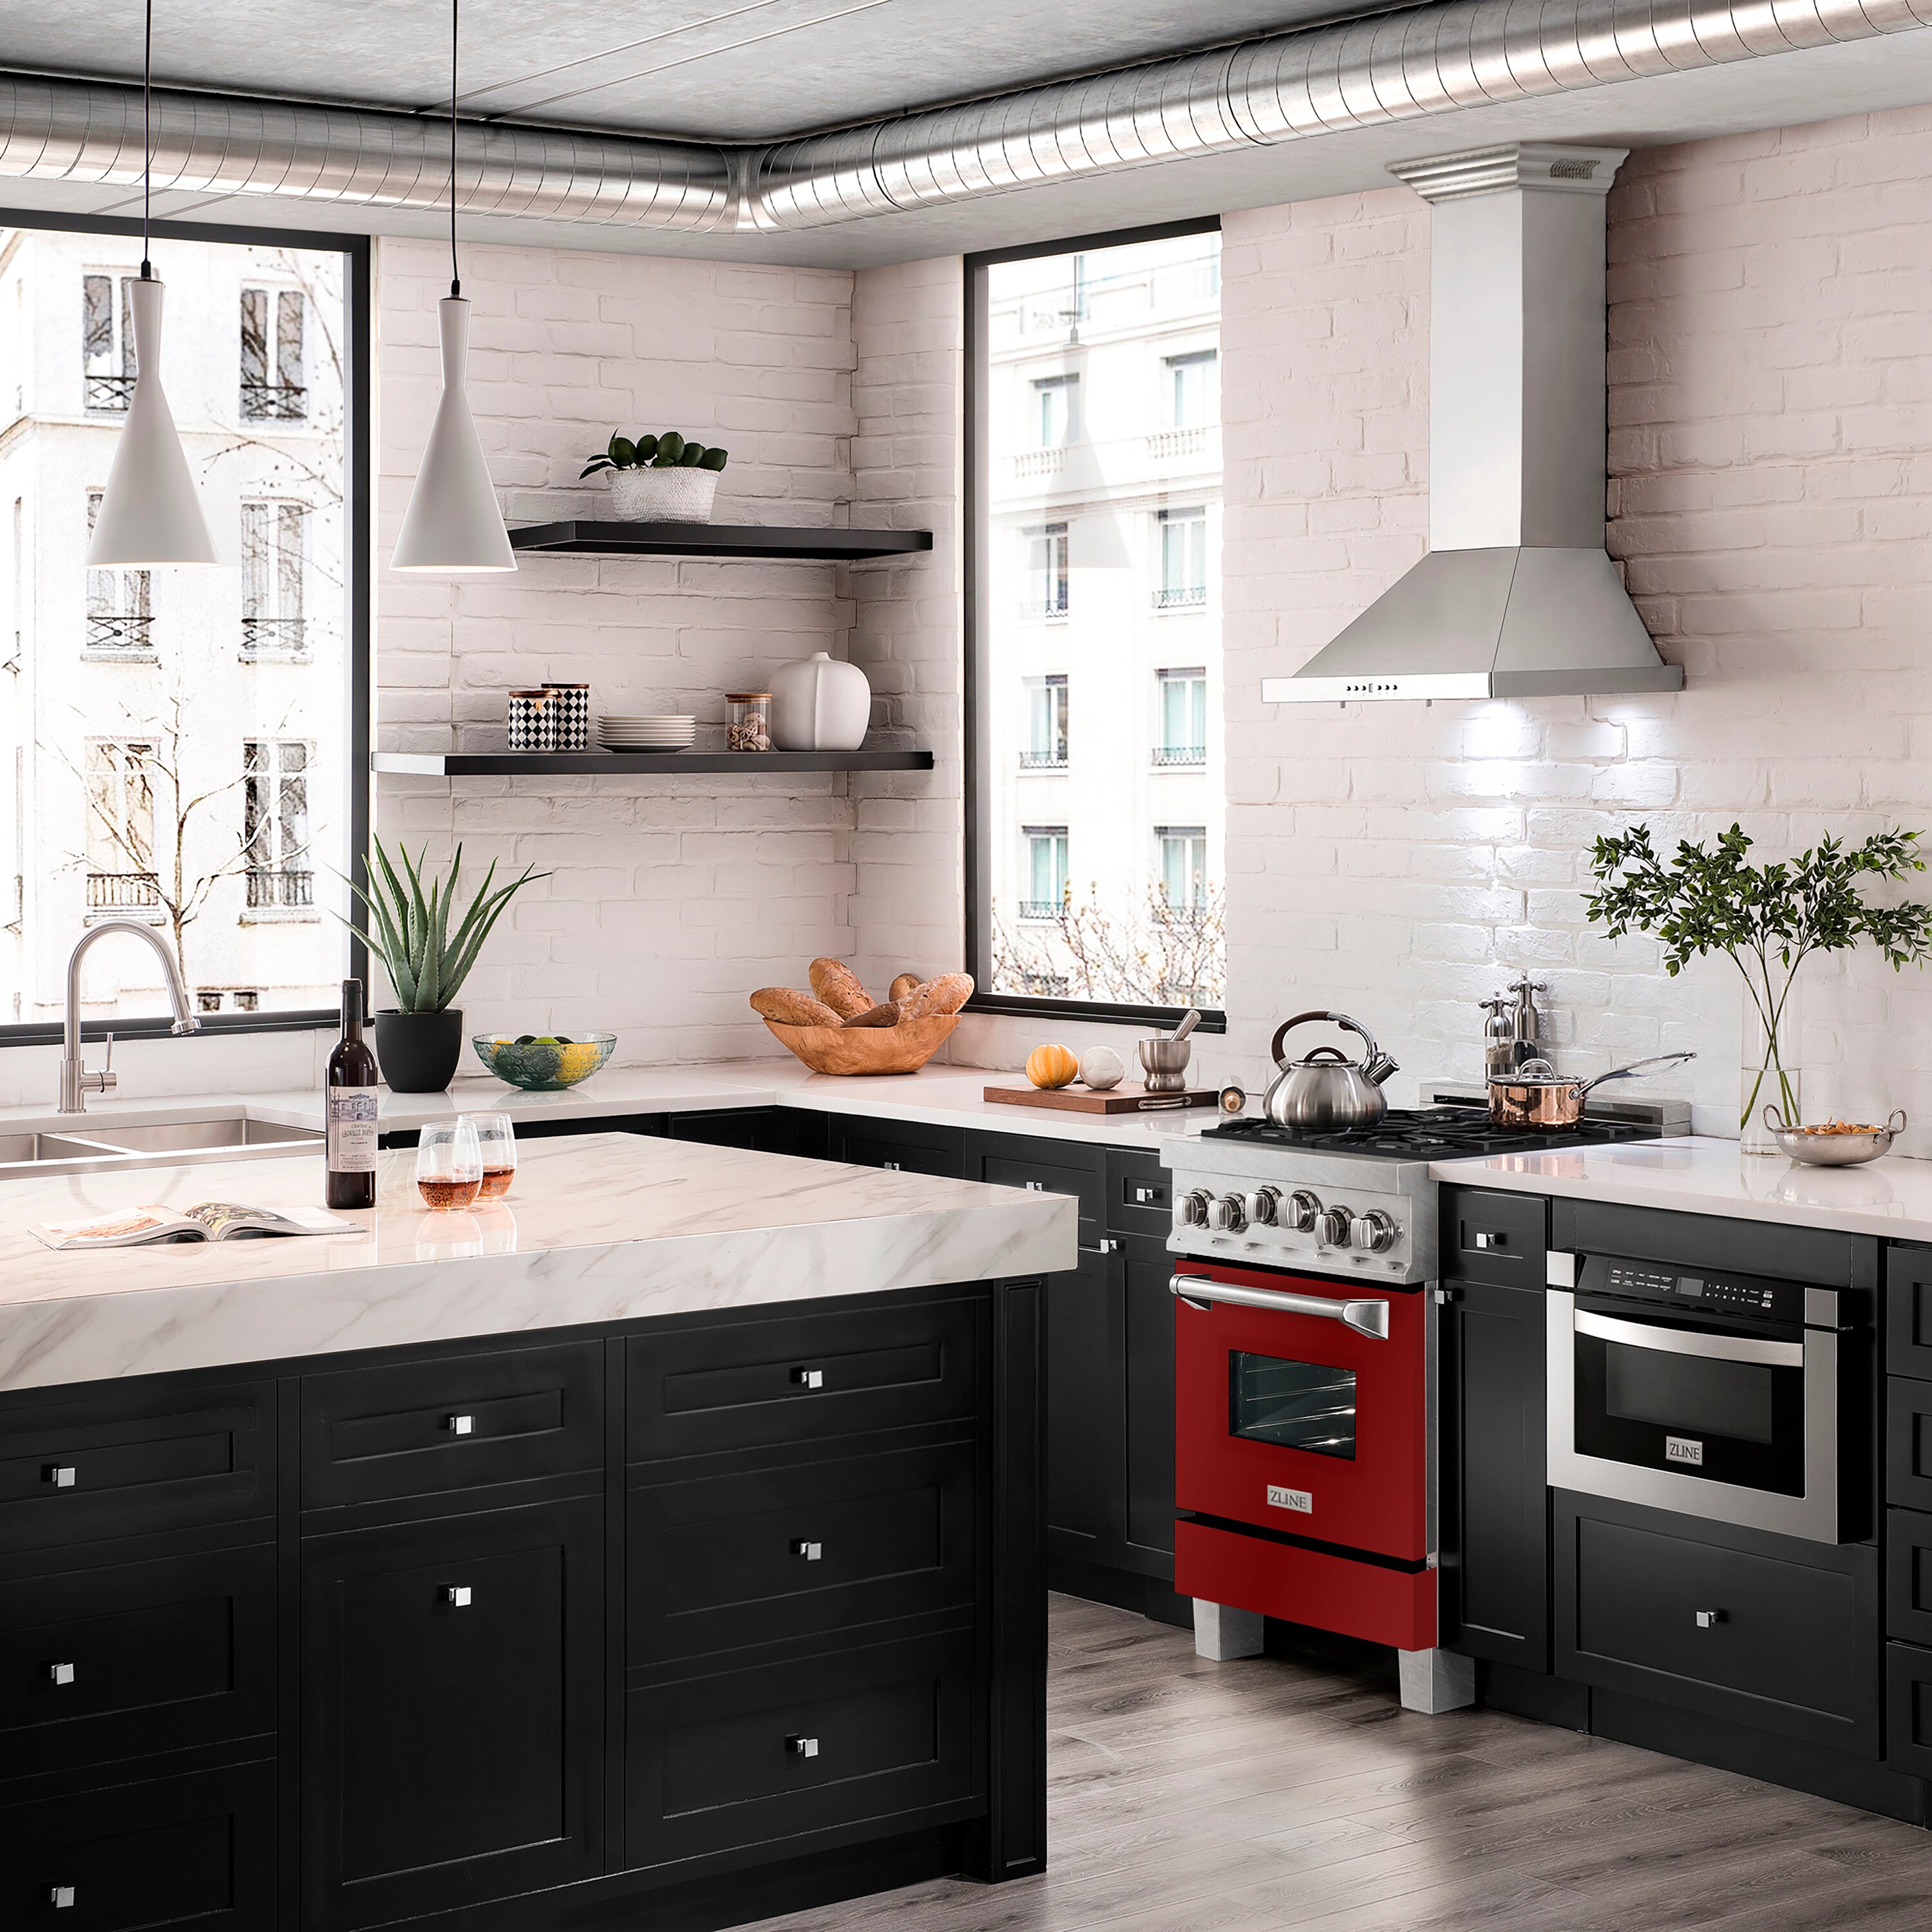 Free Vector  Kitchen table and gas stove with hobs and black steel grates.  realistic illustration of metal cooktop and grey kitchen counter near  window. stainless oven for cooking